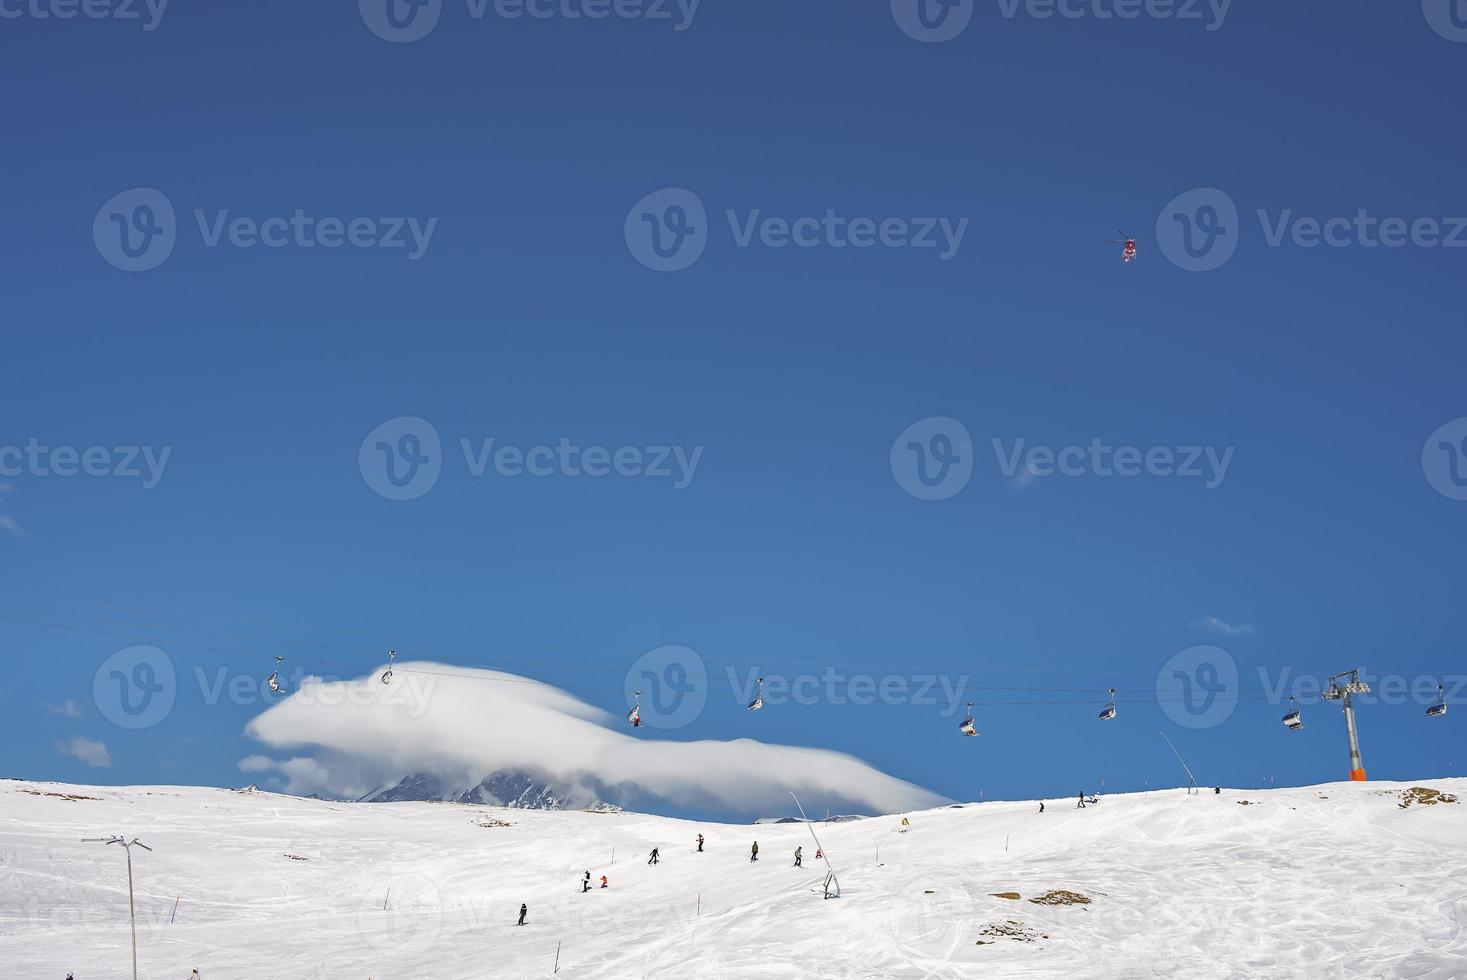 Skiers skiing on slopes and ski chair lifts over snowy mountain photo